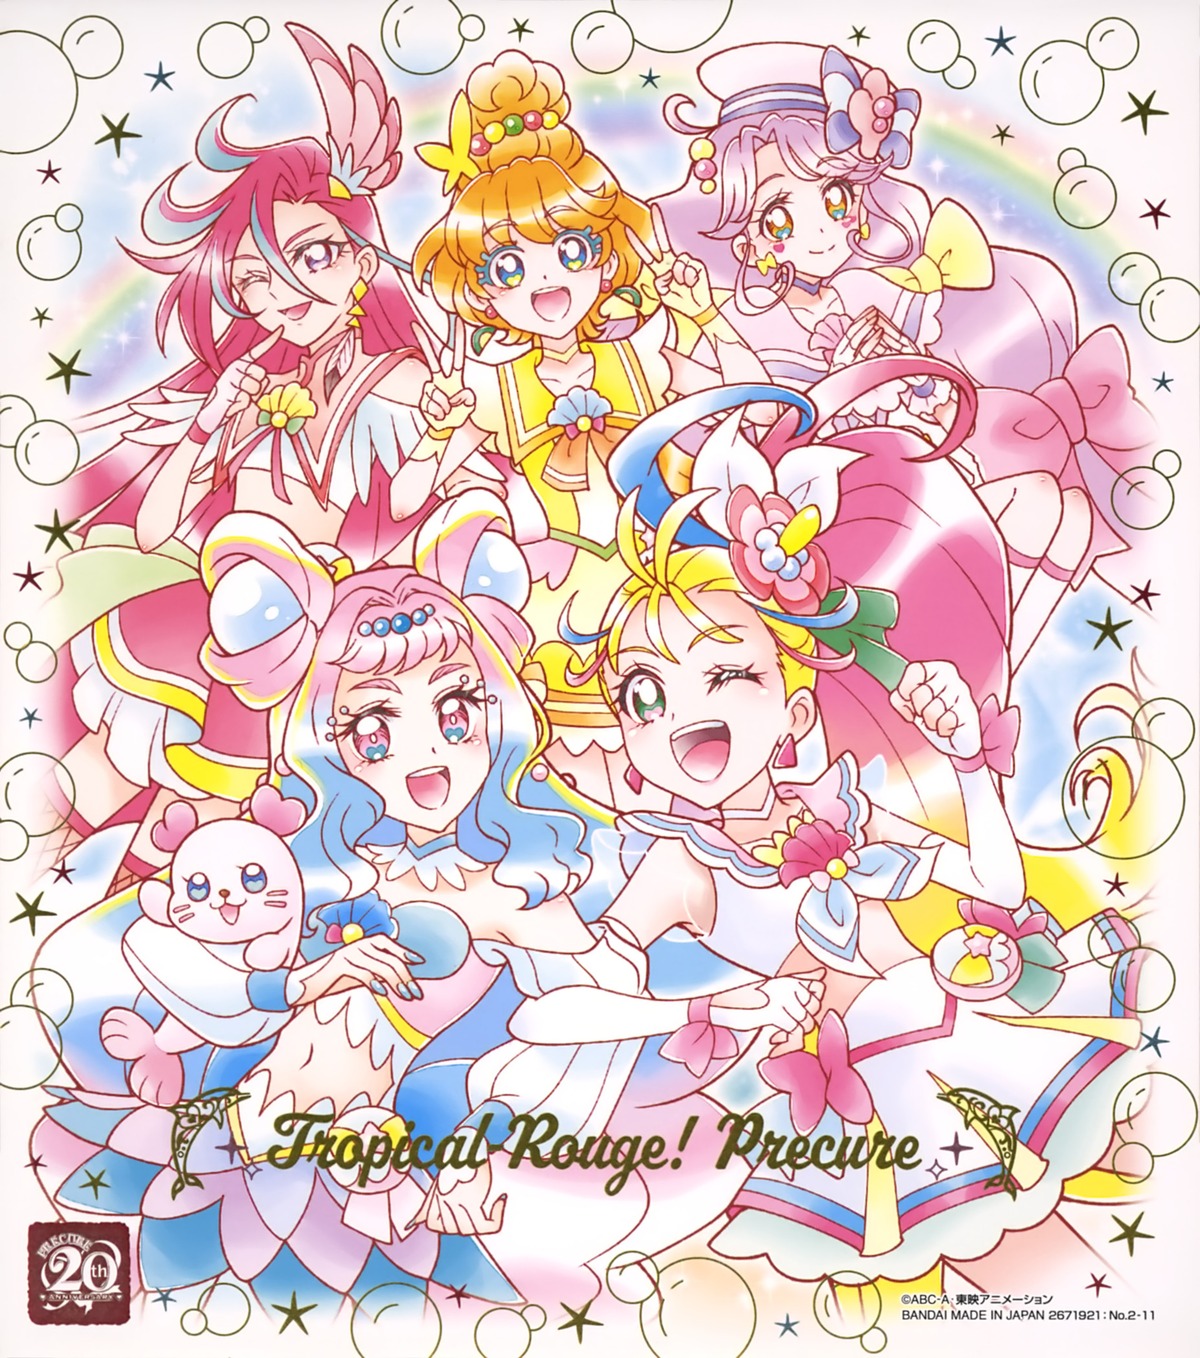 tropical-rouge!_precure